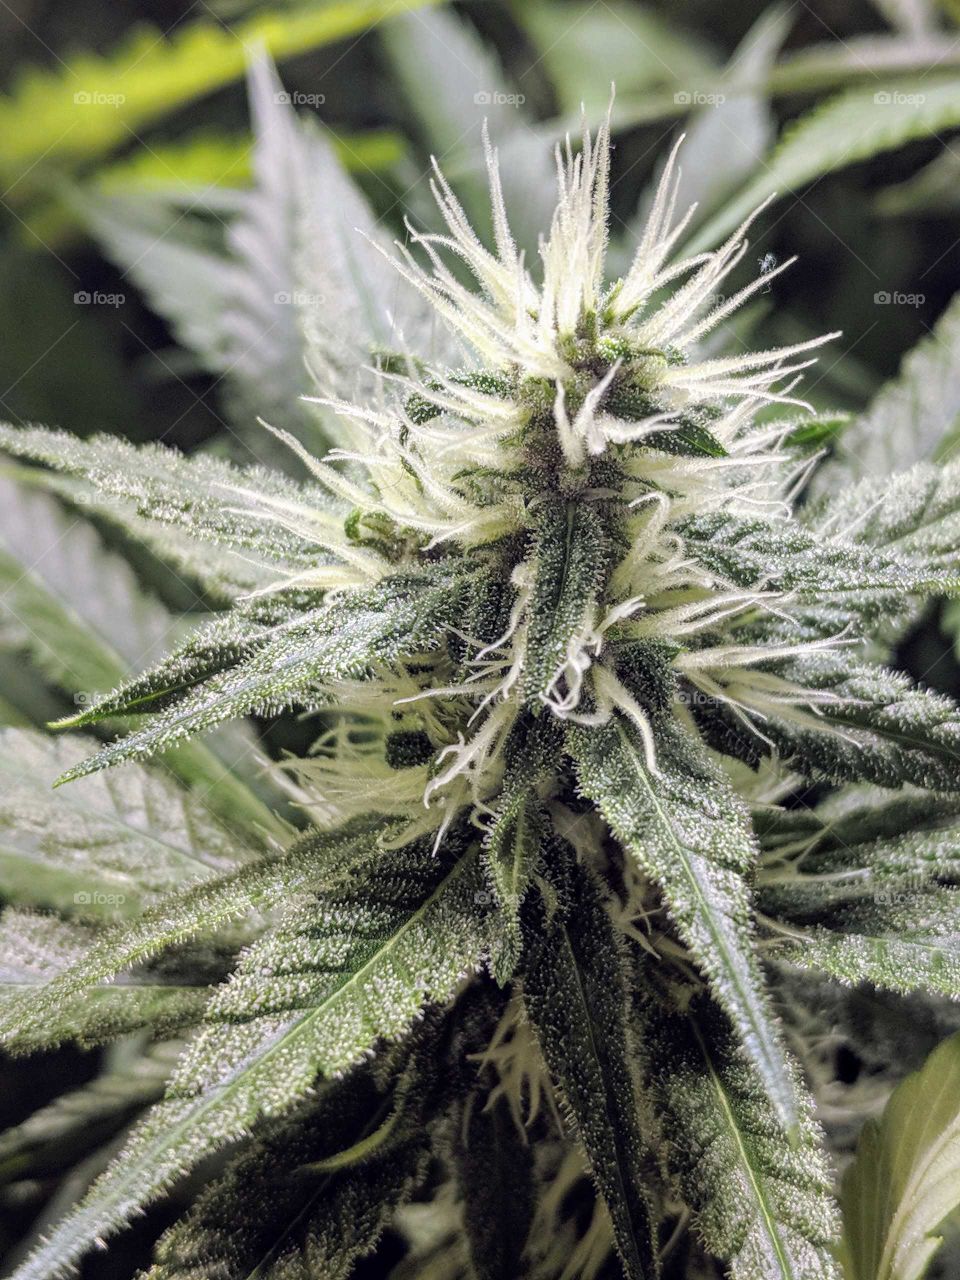 just starting to flower